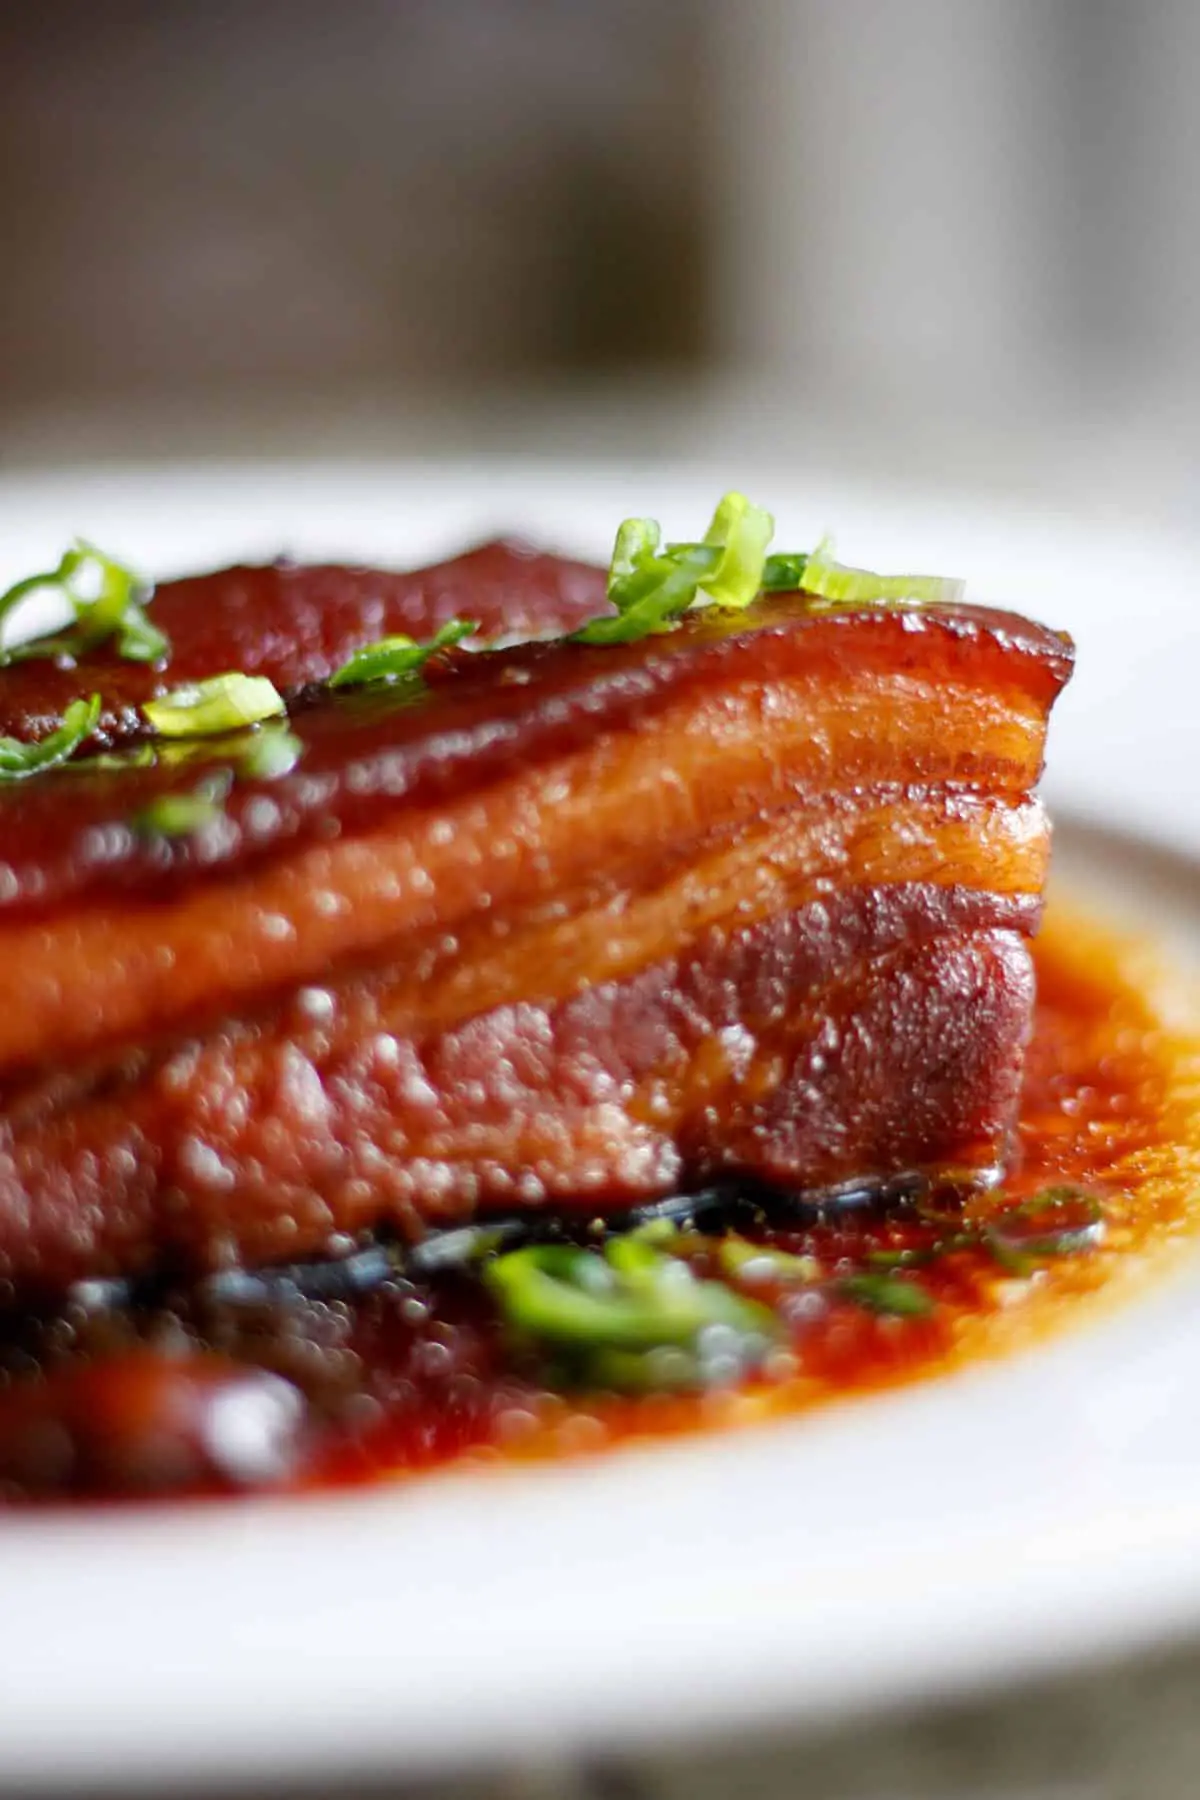 Braised pork belly that is reddish in color on a white dish atop braising sauce and garnished with green onions.